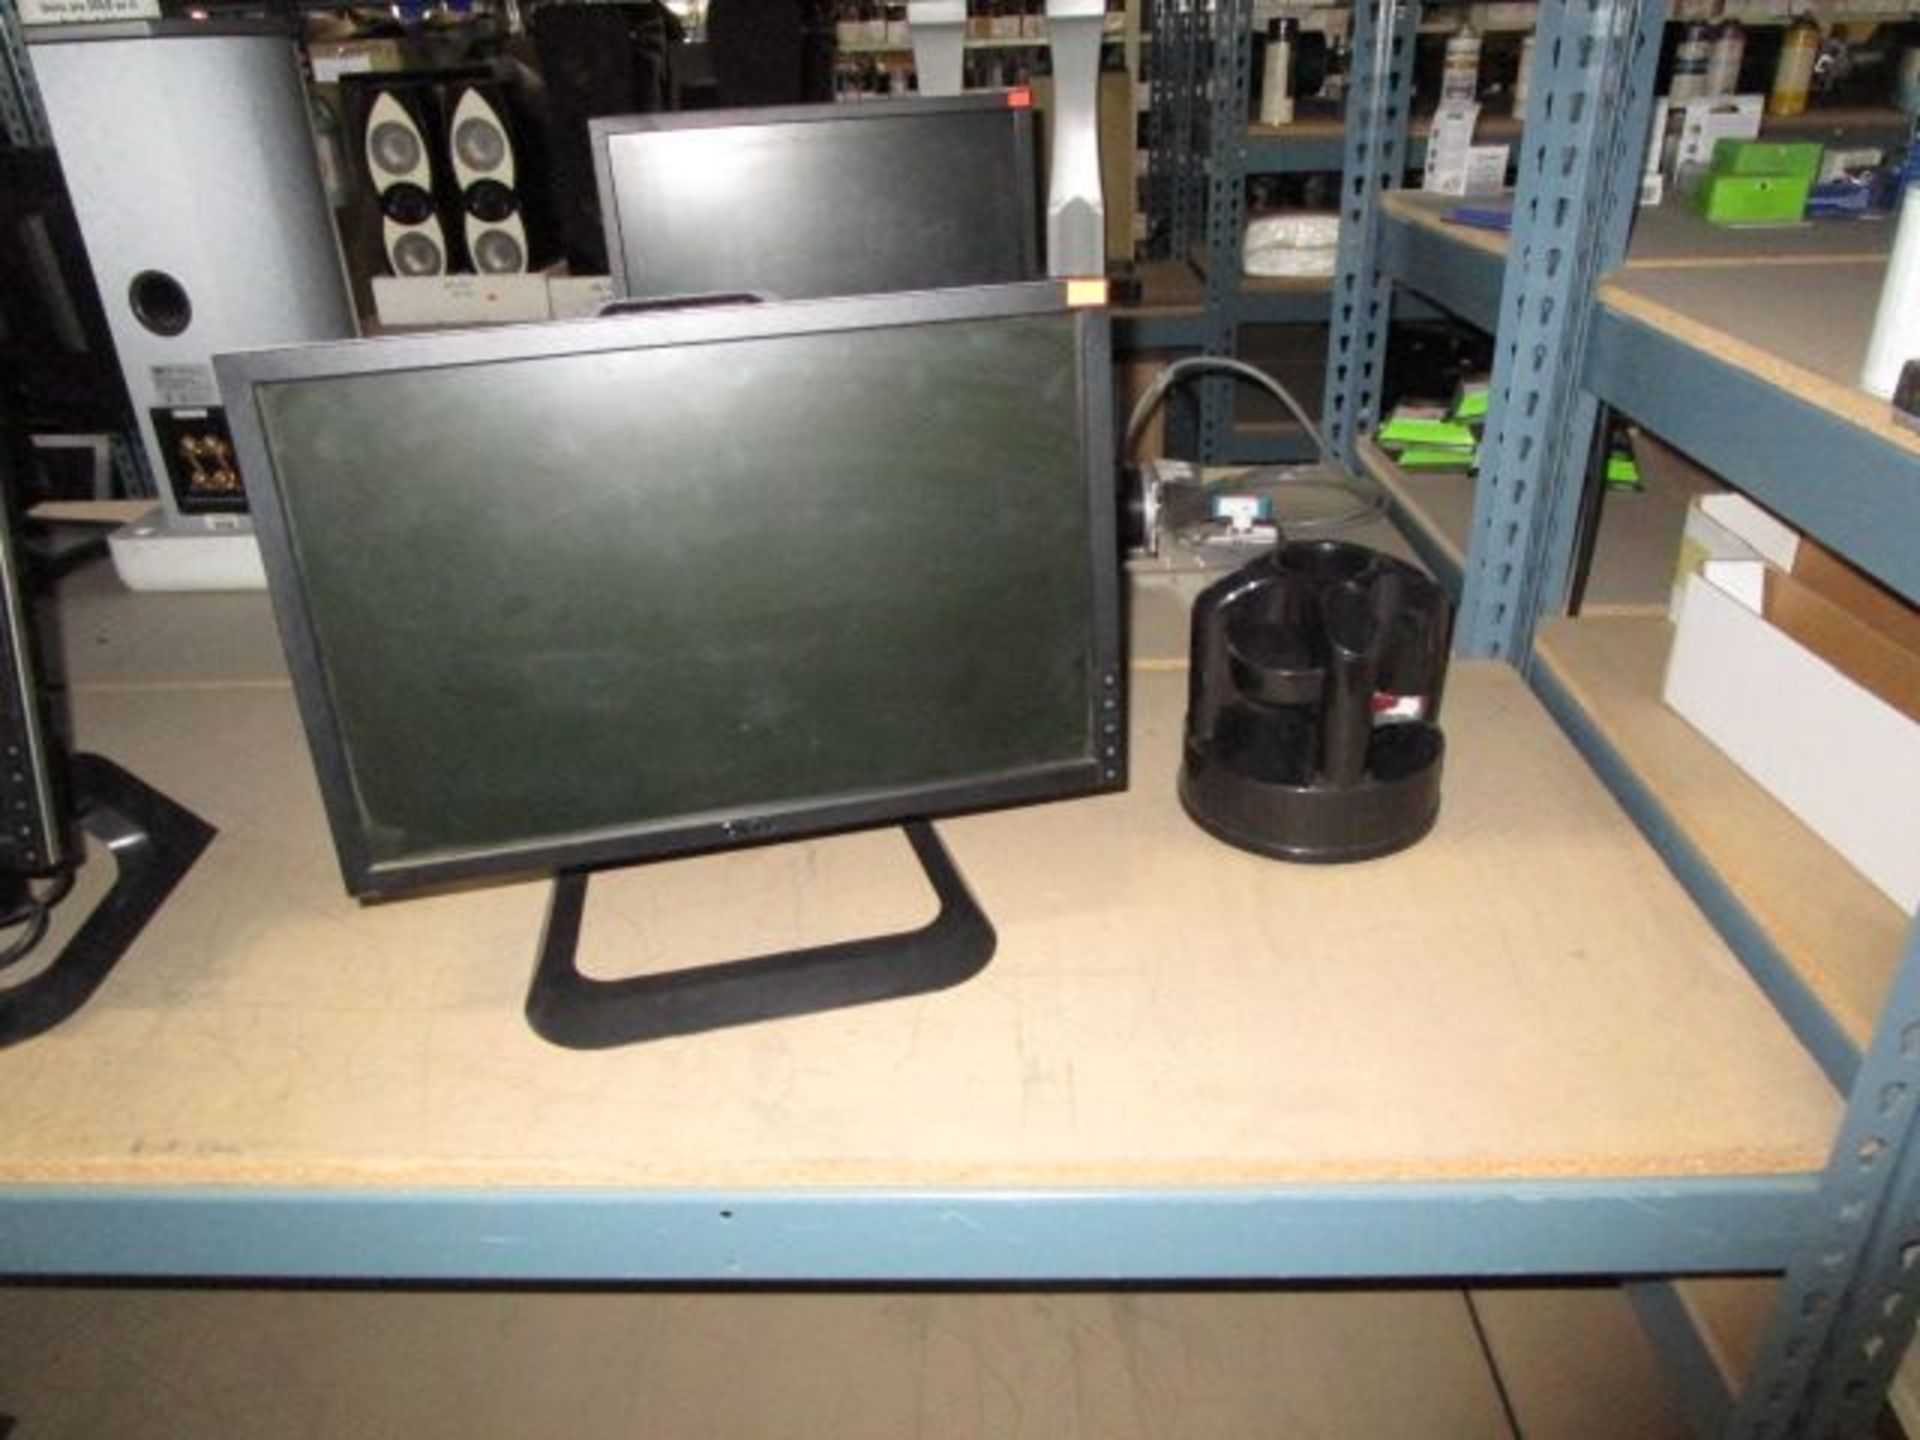 SHELVING UNIT OF SMALL STORAGE CONTAINERS AND MONITORS - Image 6 of 7